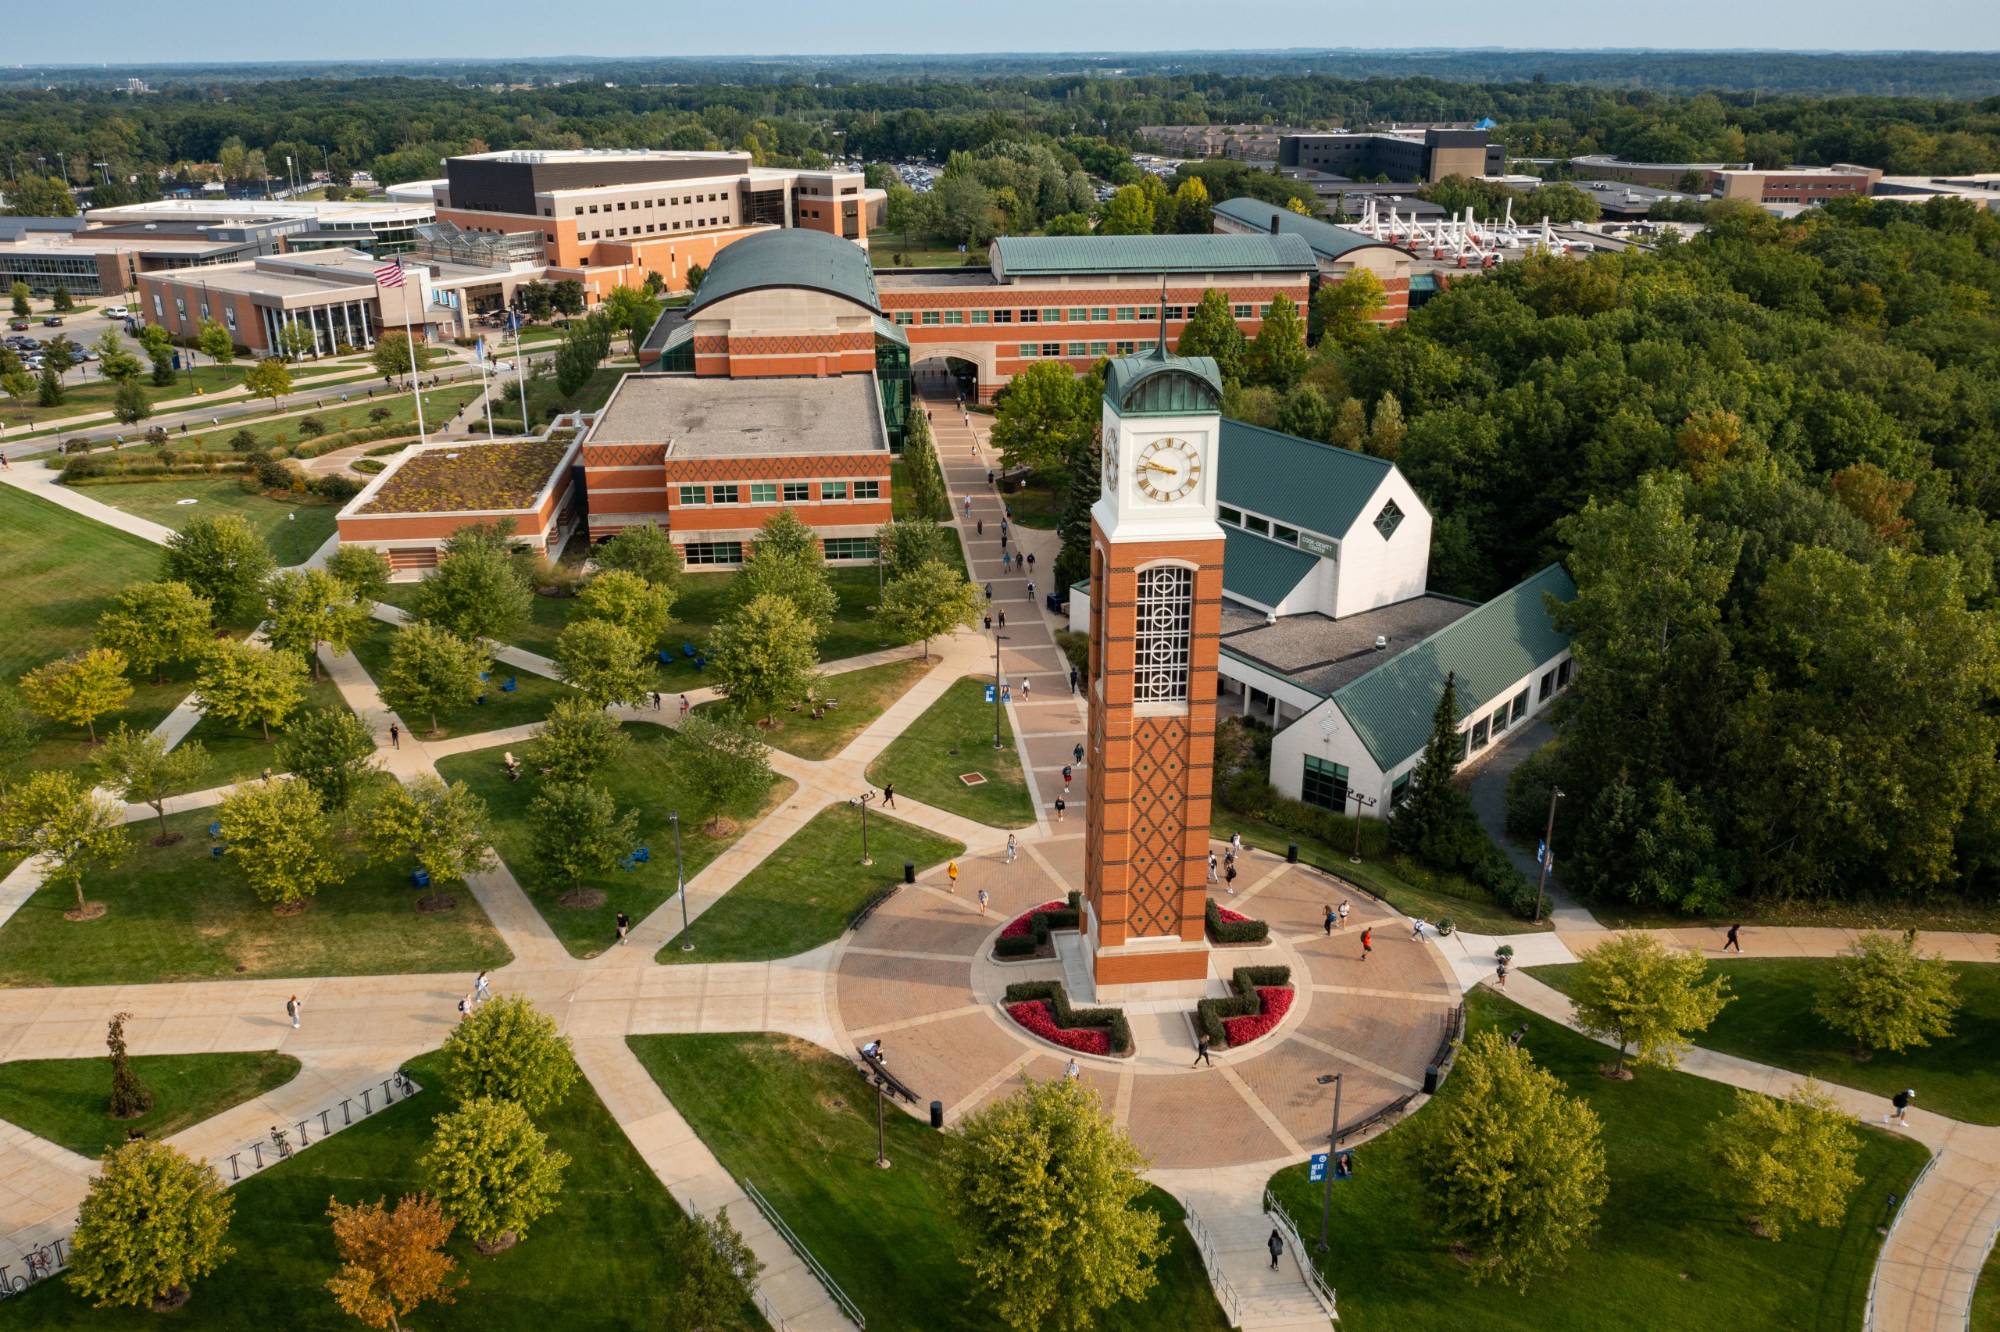 Drone photo of the clock tower on Allendale Campus.